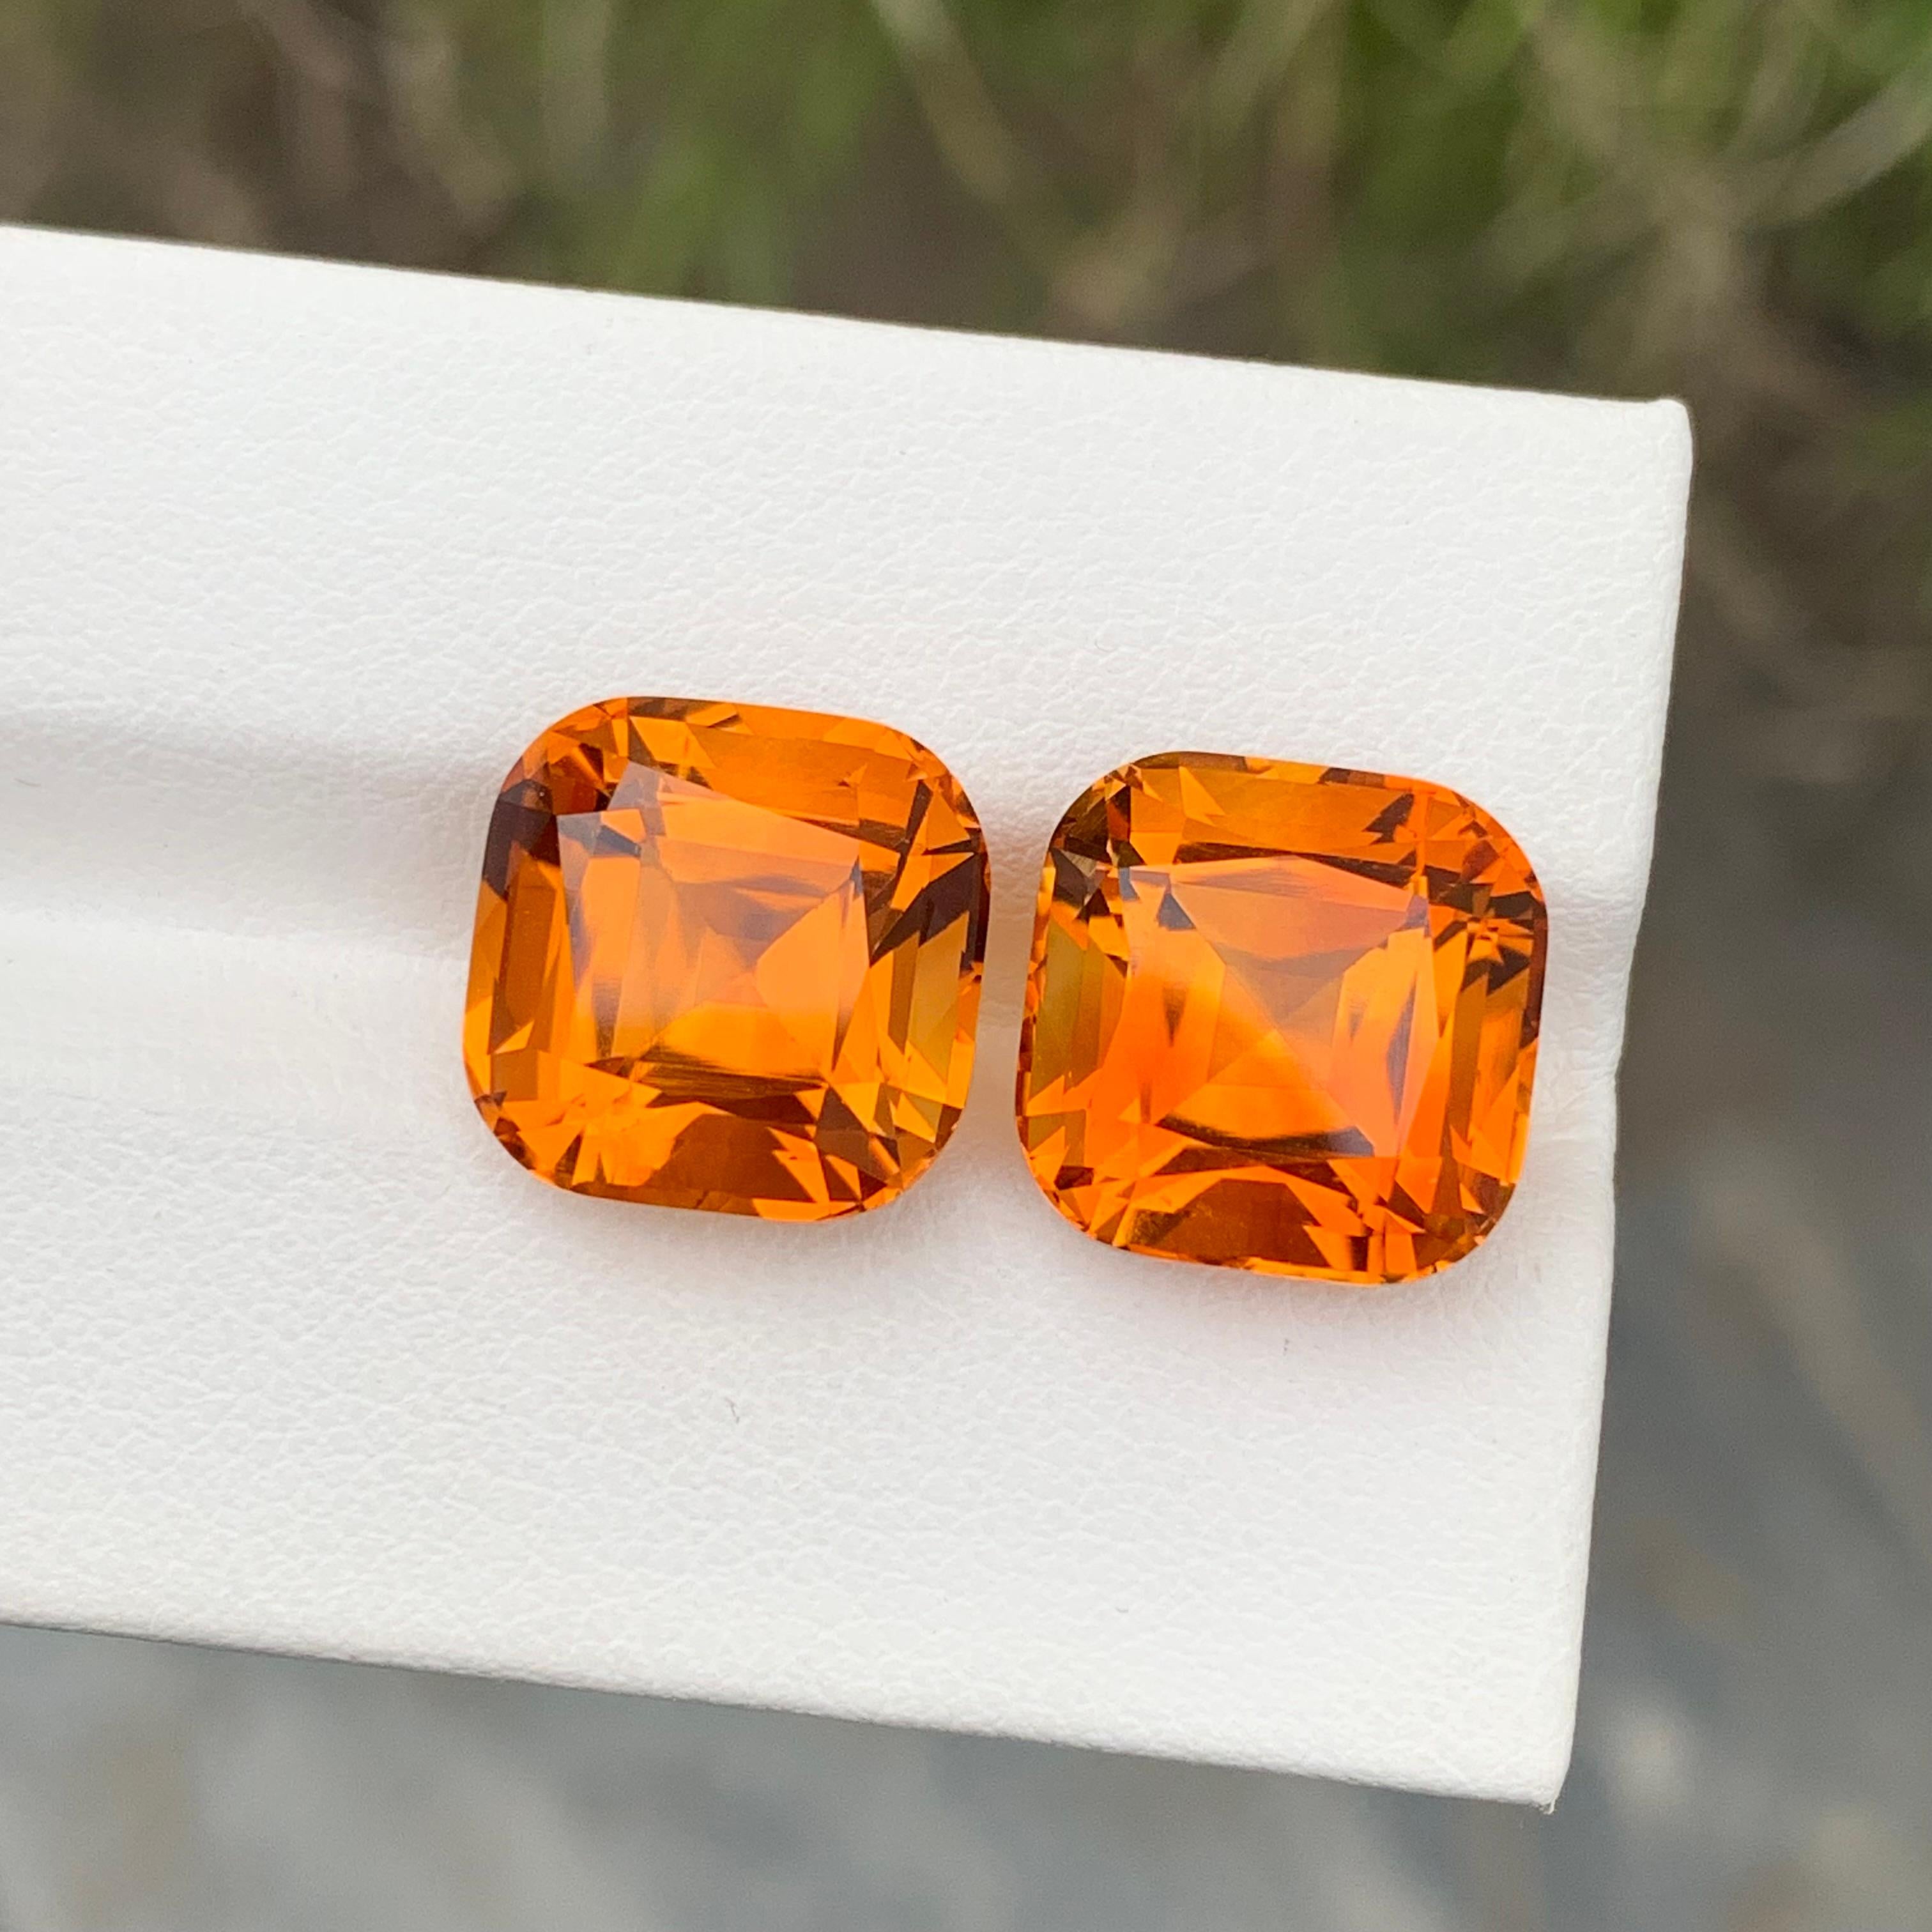 Stone: Mandarin Citrine 
Weight: 16.80 Carats 
Dimension: 12x12x9.2 & 9.3 Mm
Color: Orange
Shape: Cushion
Treatment: Non
.
Mandarin Citrine is a rare and exquisite gemstone known for its vibrant orange-yellow hue reminiscent of ripe mandarin